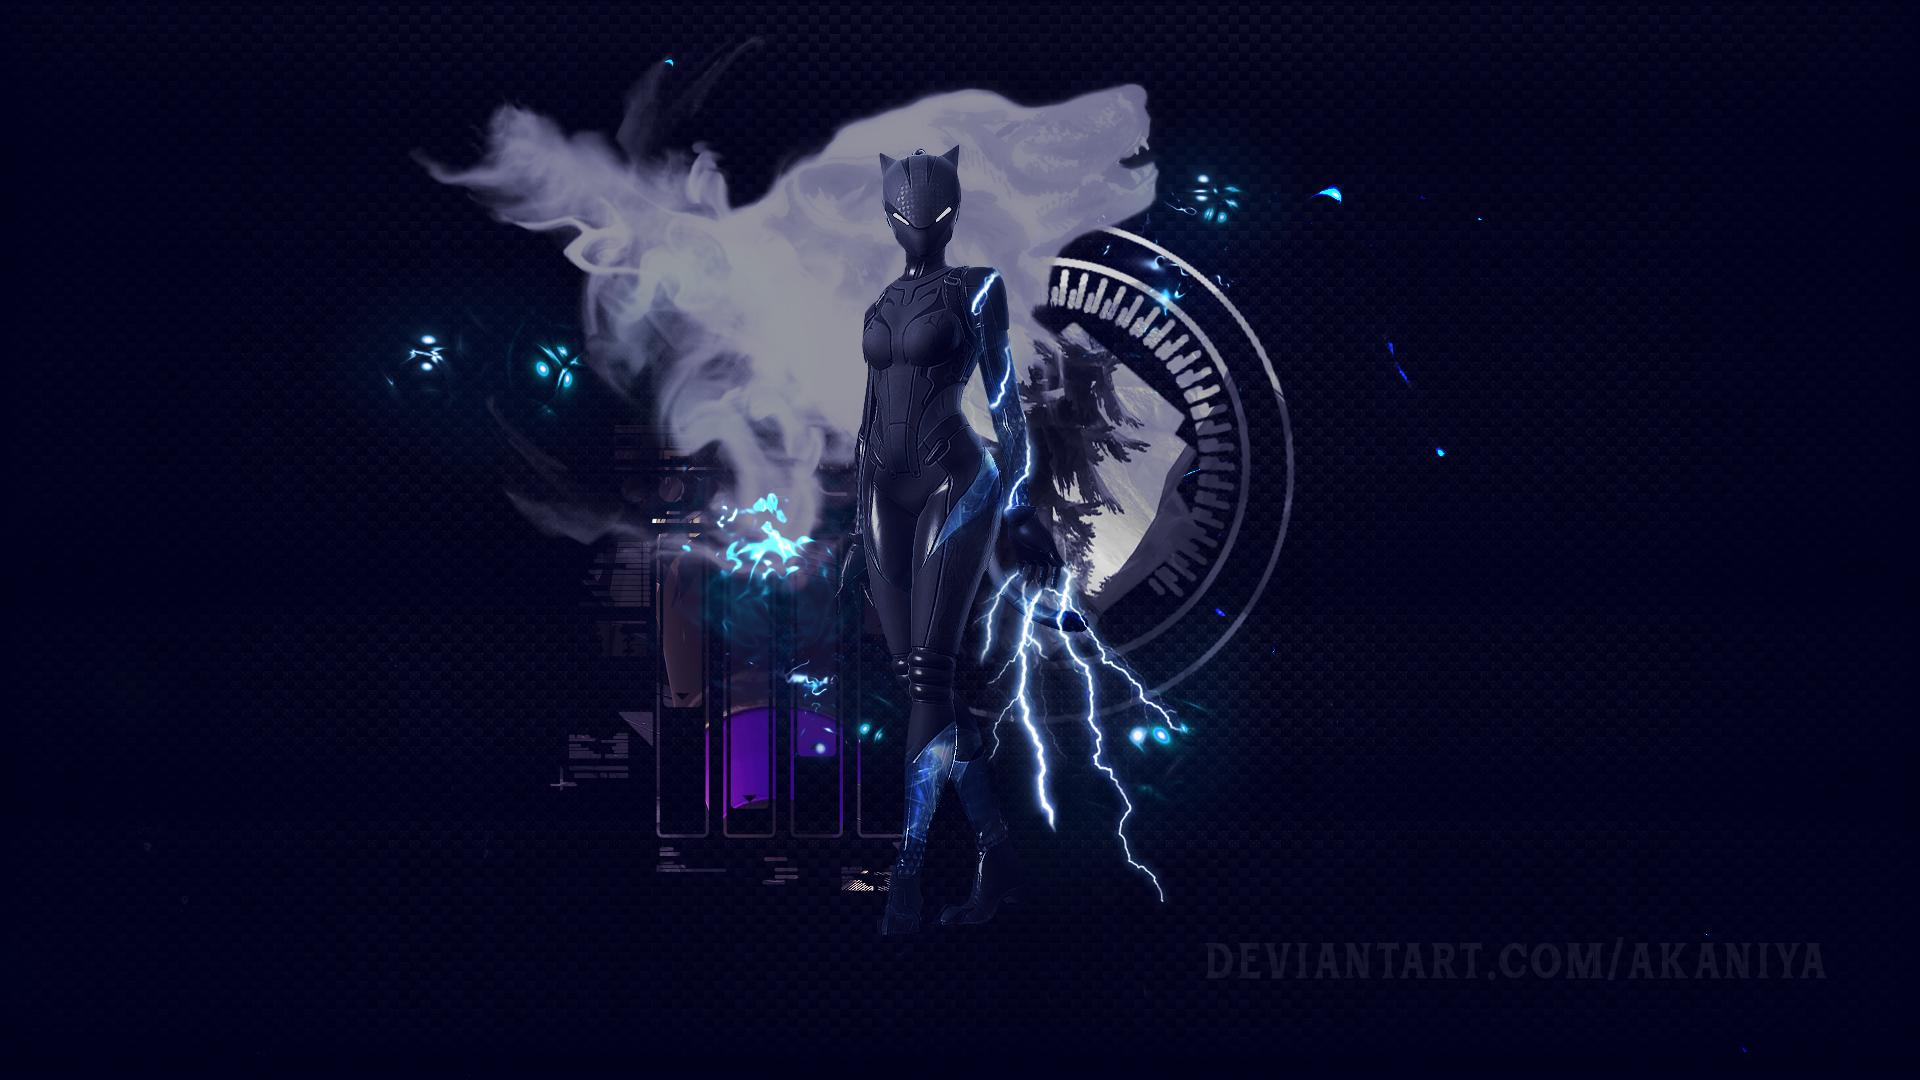 Lynx Black Panther of Fortnite by Akaniya Wallpaper and Free